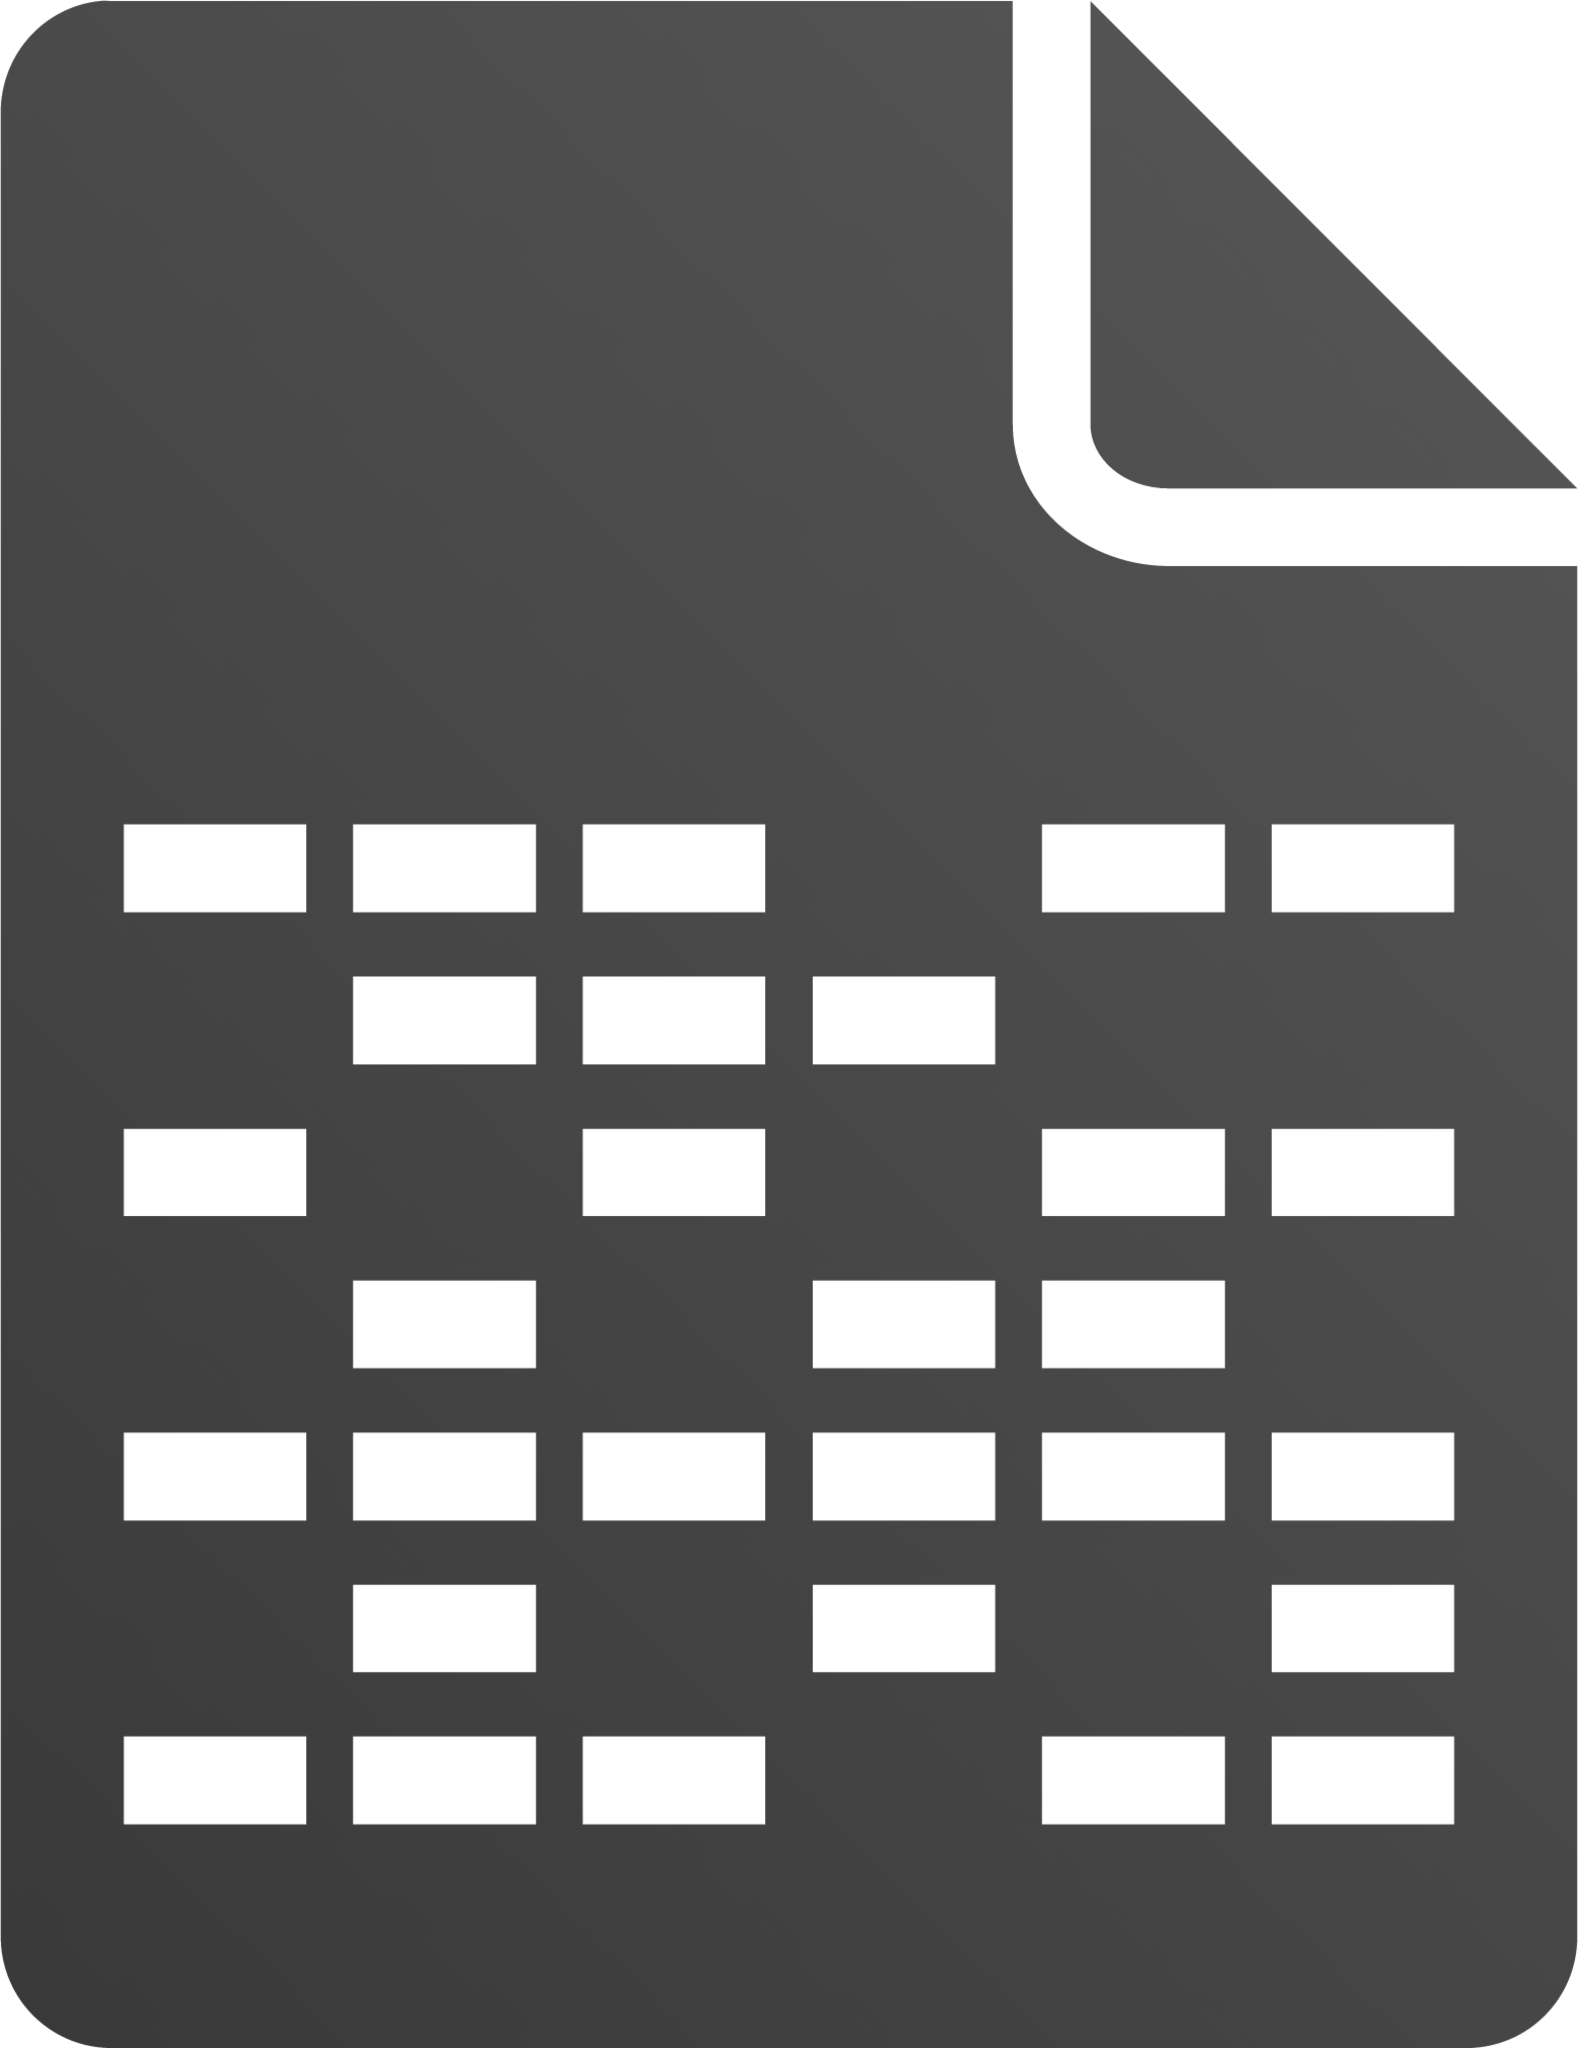 multipart encrypted icon